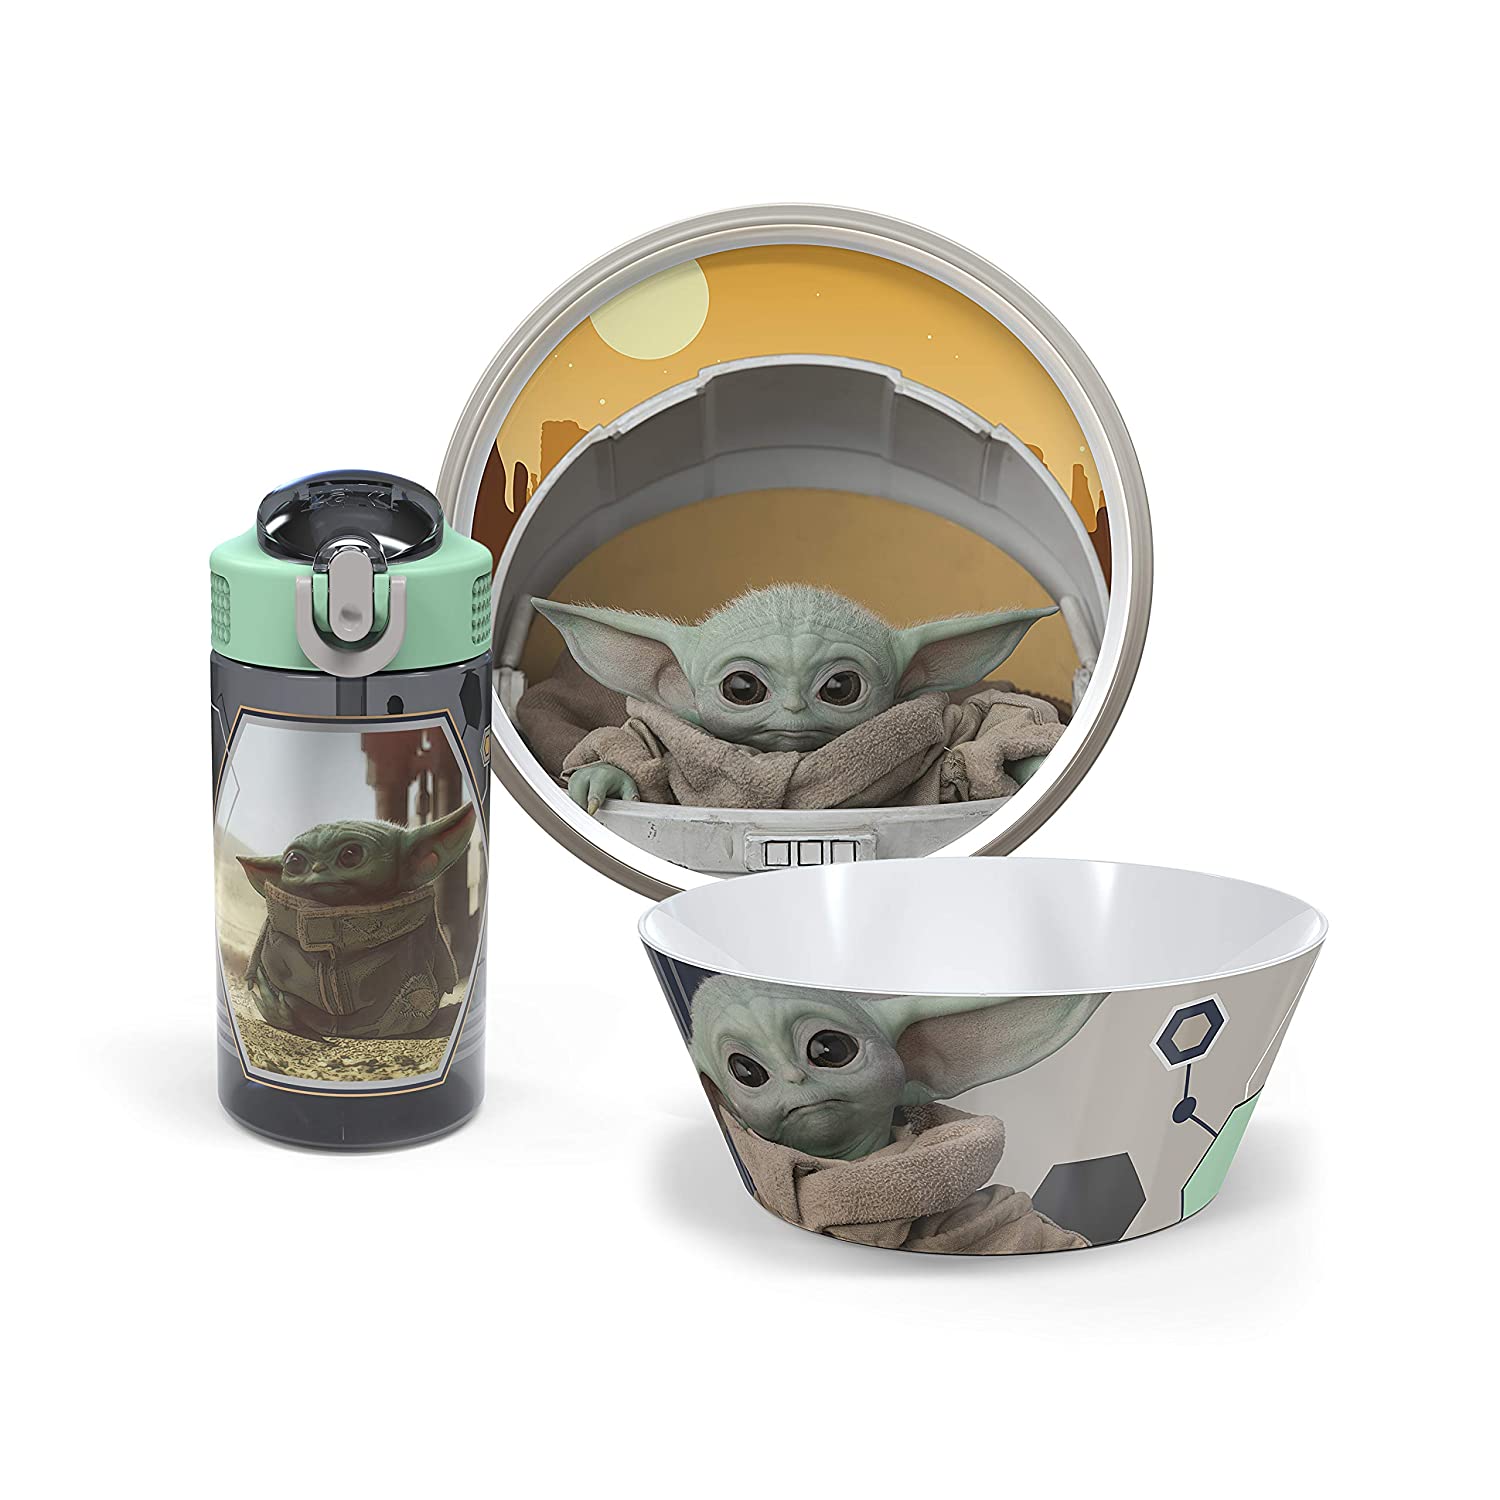 Star Wars: The Mandalorian Plate, Bowl and Water Bottle, The Child (Baby Yoda), 3-piece set slideshow image 1